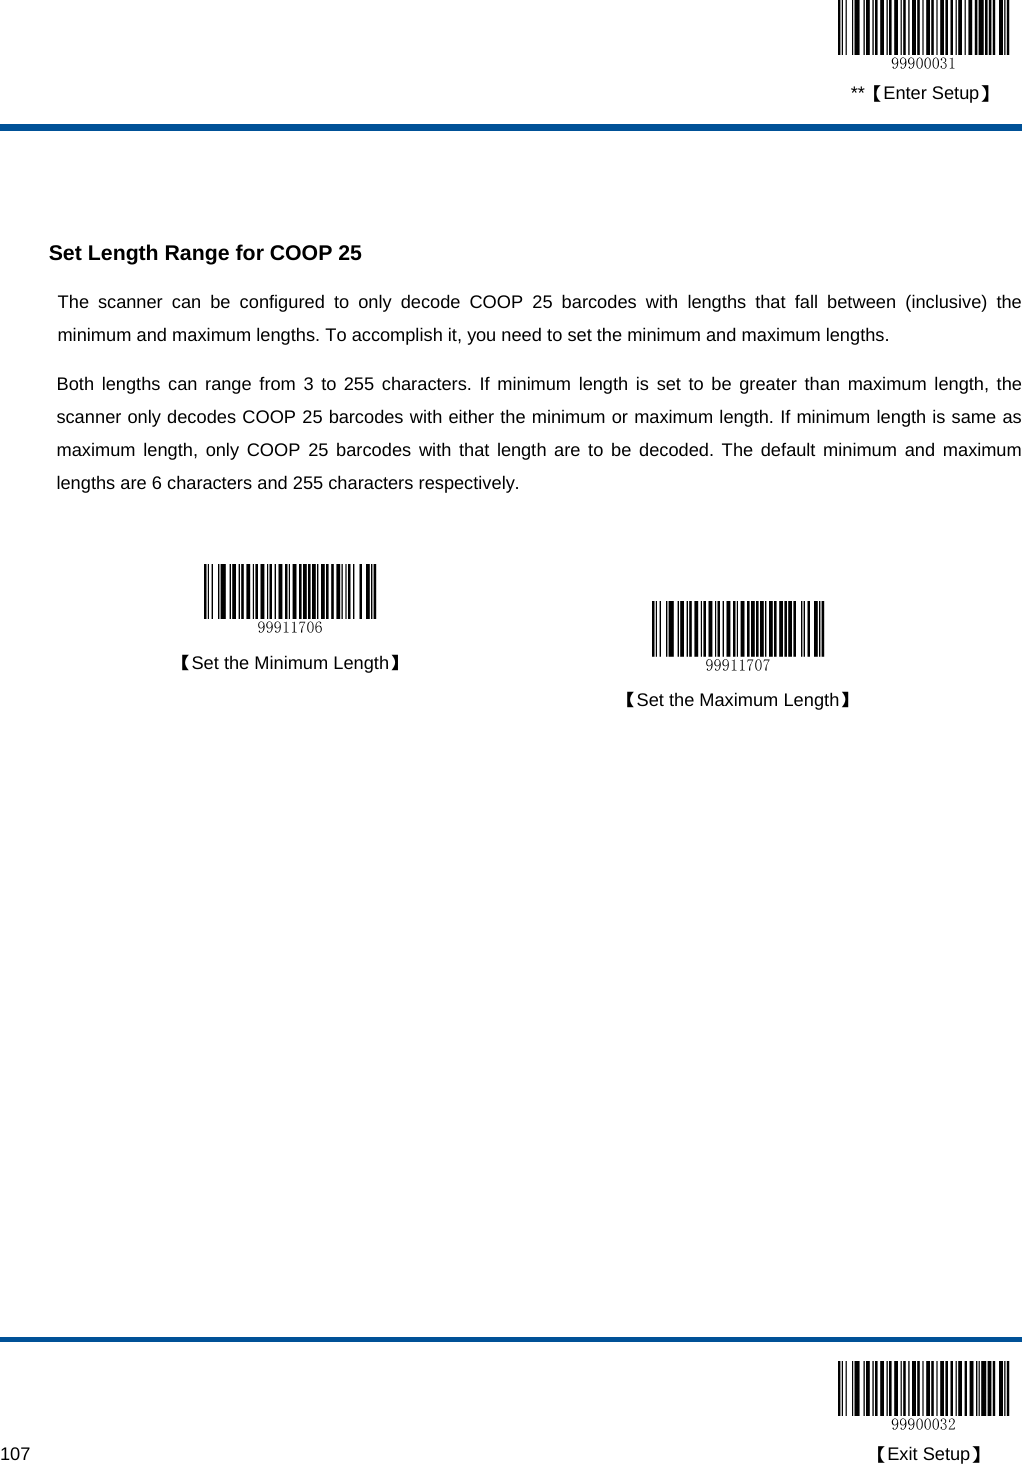  **【Enter Setup】  107                                                                                                                                                                                        【Exit Setup】   Set Length Range for COOP 25 The scanner can be configured to only decode COOP 25 barcodes with lengths that fall between (inclusive) the minimum and maximum lengths. To accomplish it, you need to set the minimum and maximum lengths. Both lengths can range from 3 to 255 characters. If minimum length is set to be greater than maximum length, the scanner only decodes COOP 25 barcodes with either the minimum or maximum length. If minimum length is same as maximum length, only COOP 25 barcodes with that length are to be decoded. The default minimum and maximum lengths are 6 characters and 255 characters respectively.    【Set the Minimum Length】   【Set the Maximum Length】  